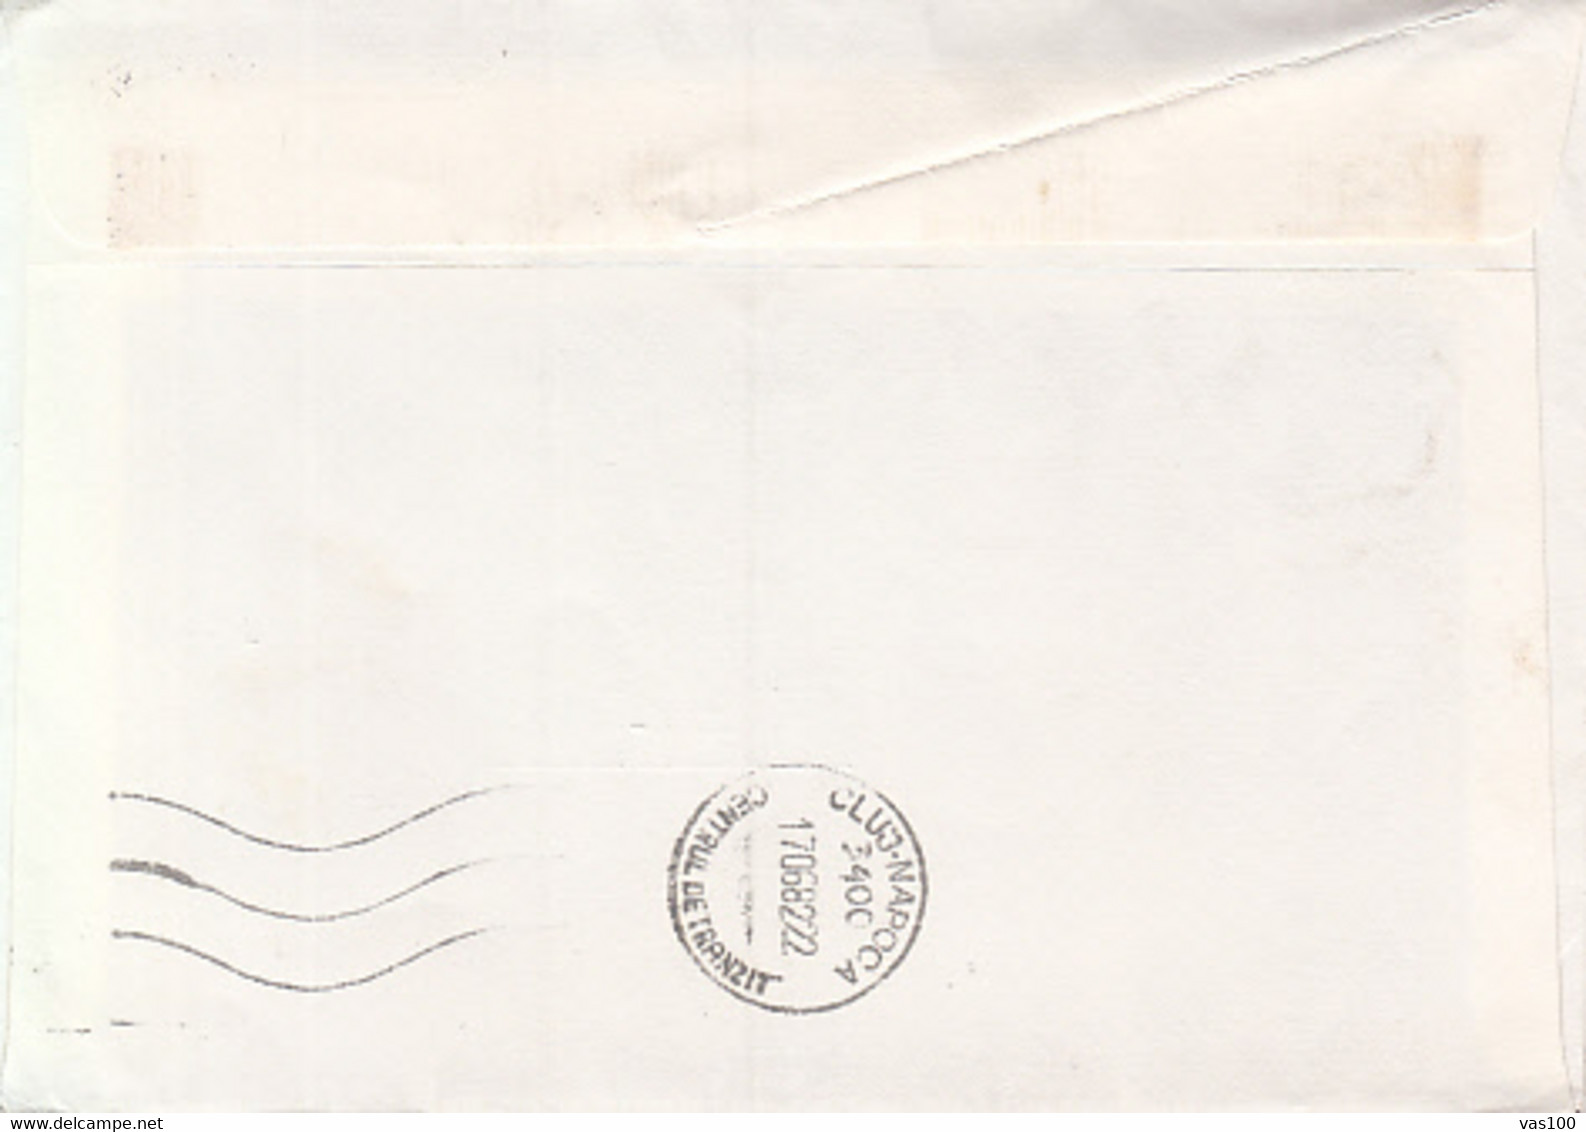 GRAND DUKE JEAN, SYNAGOGUE, STAMPS ON COVER, 1982, LUXEMBOURG - Brieven En Documenten